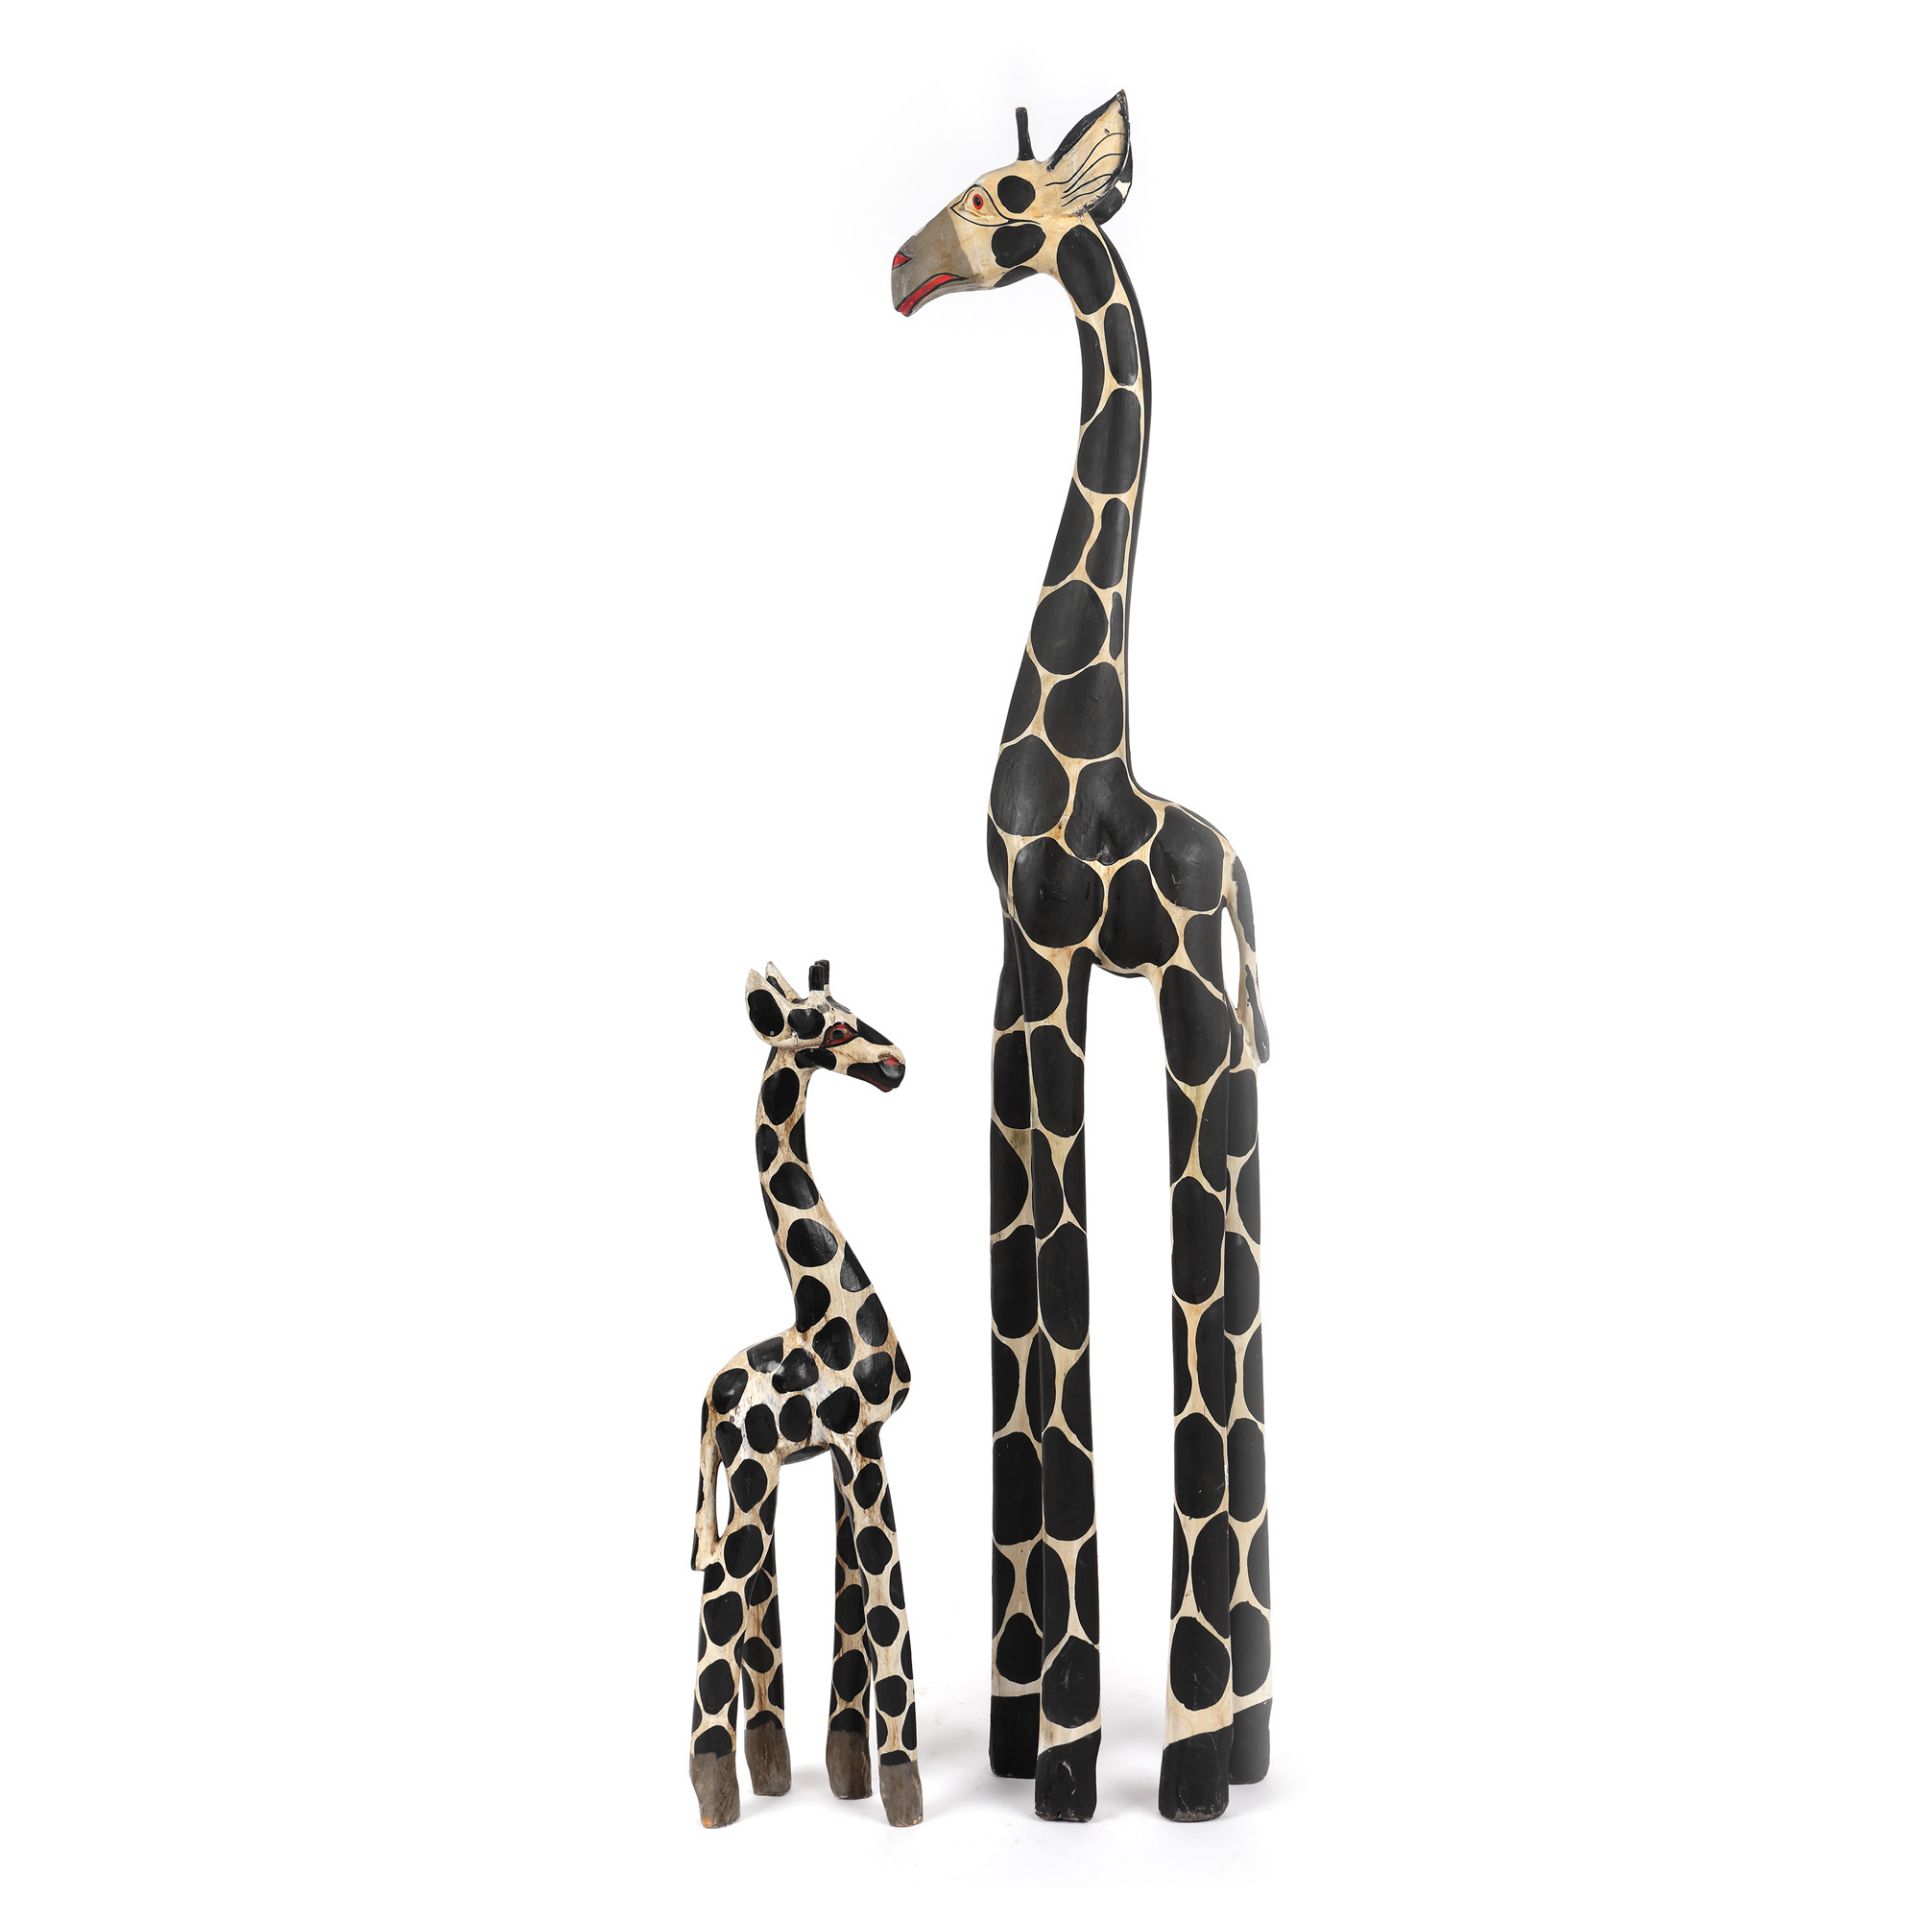 Pair of Art Deco giraffes made of teak wood, France, approx. 1930 - Image 2 of 4